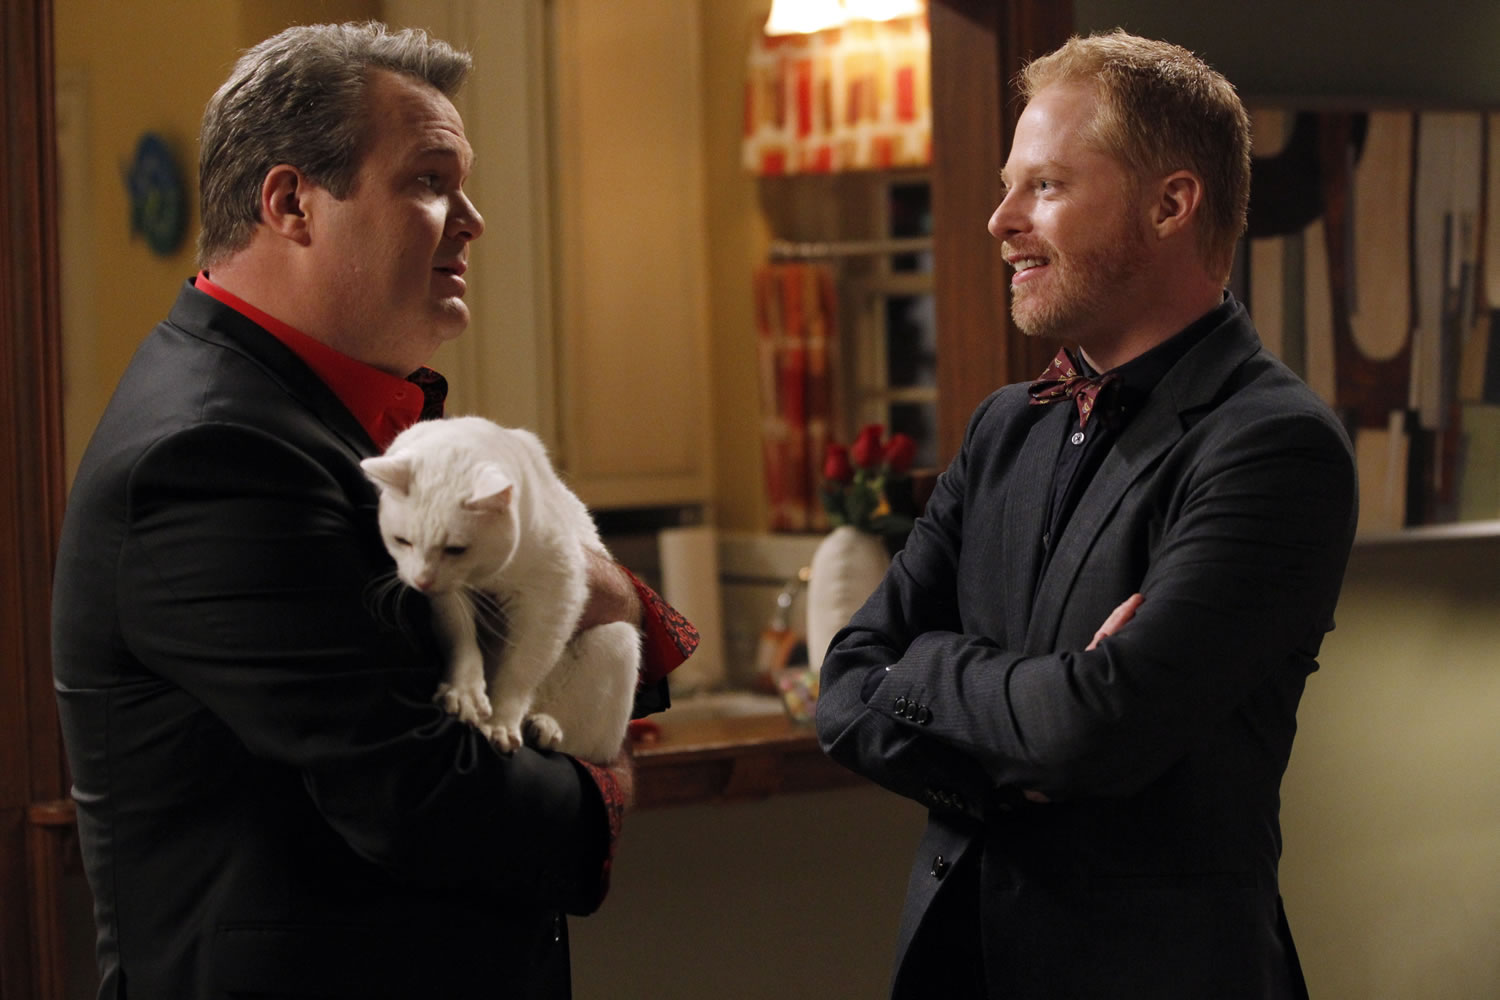 ABC
Eric Stonestreet, left, and Jesse Tyler Ferguson in a scene from &quot;Modern Family.&quot; Delayed viewings of the show help it rank as one of the most popular on the air.